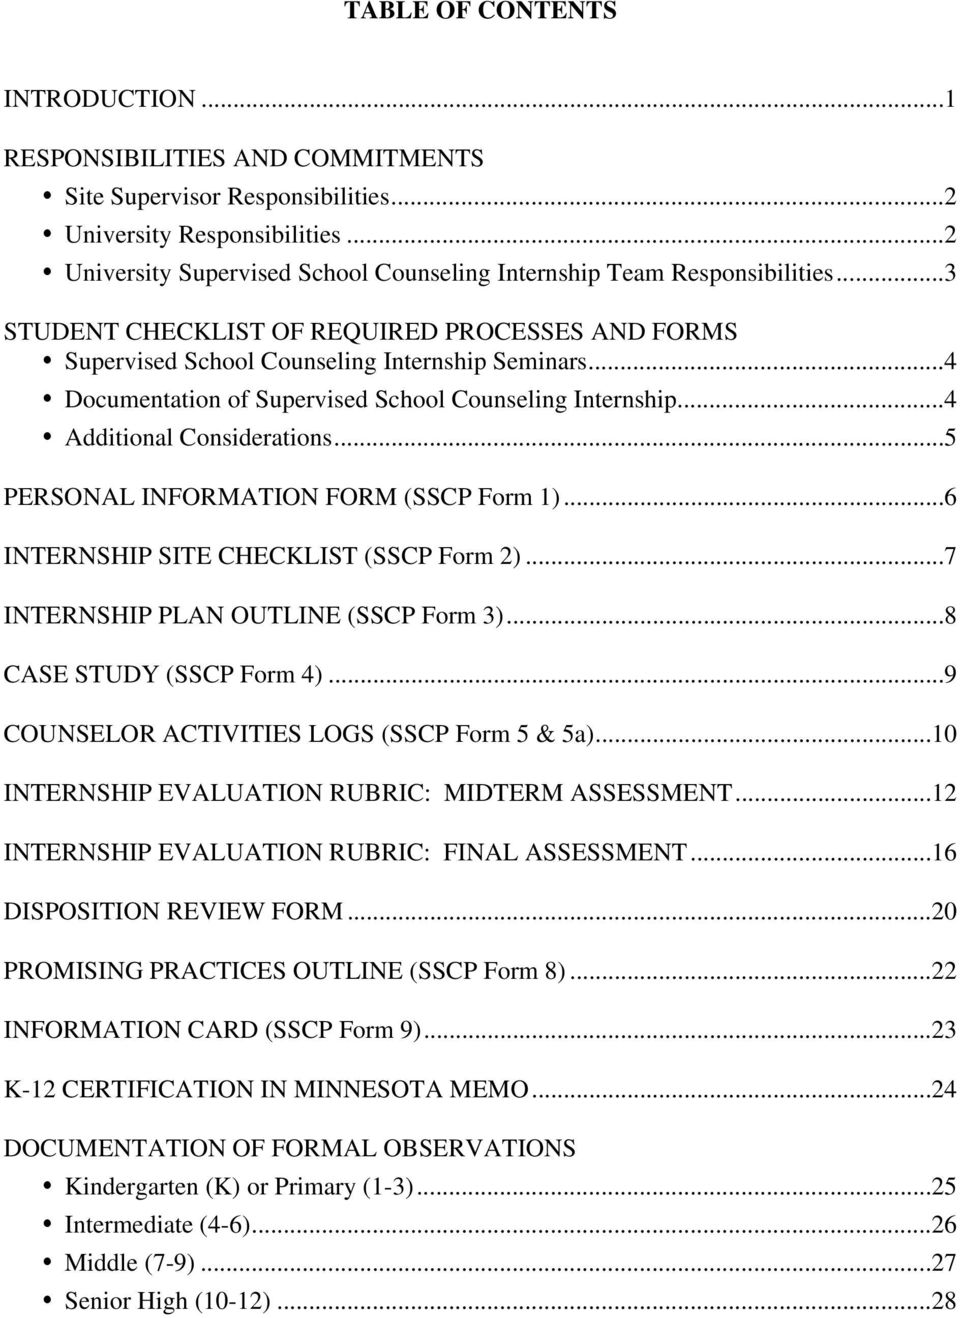 ..4 Documentation of Supervised School Counseling Internship...4 Additional Considerations...5 PERSONAL INFORMATION FORM (SSCP Form 1)...6 INTERNSHIP SITE CHECKLIST (SSCP Form 2).